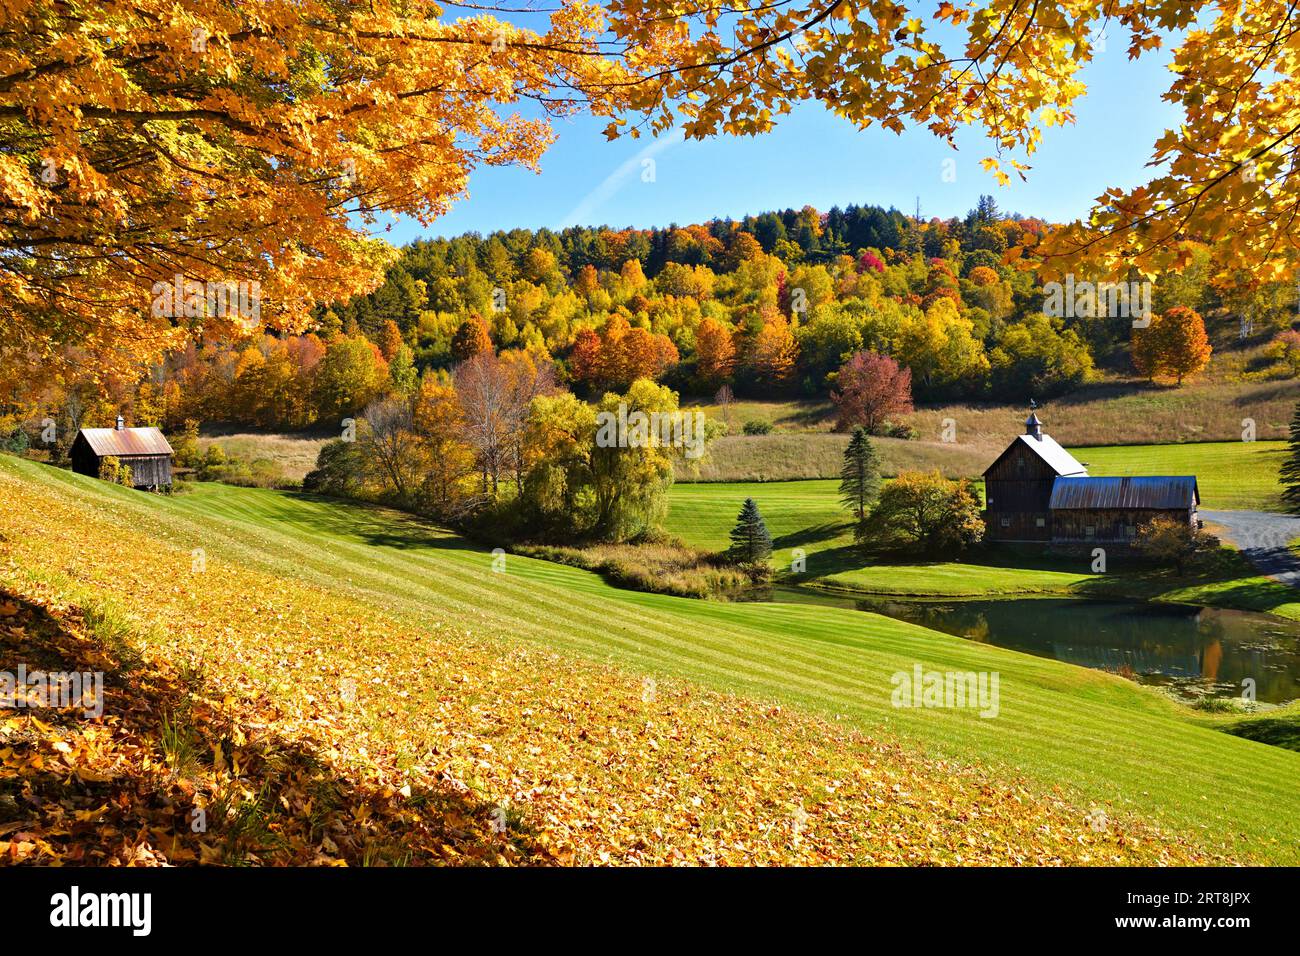 Autumn countryside with frame of colorful leaves and rustic wooden barns near Woodstock, Vermont, USA Stock Photo